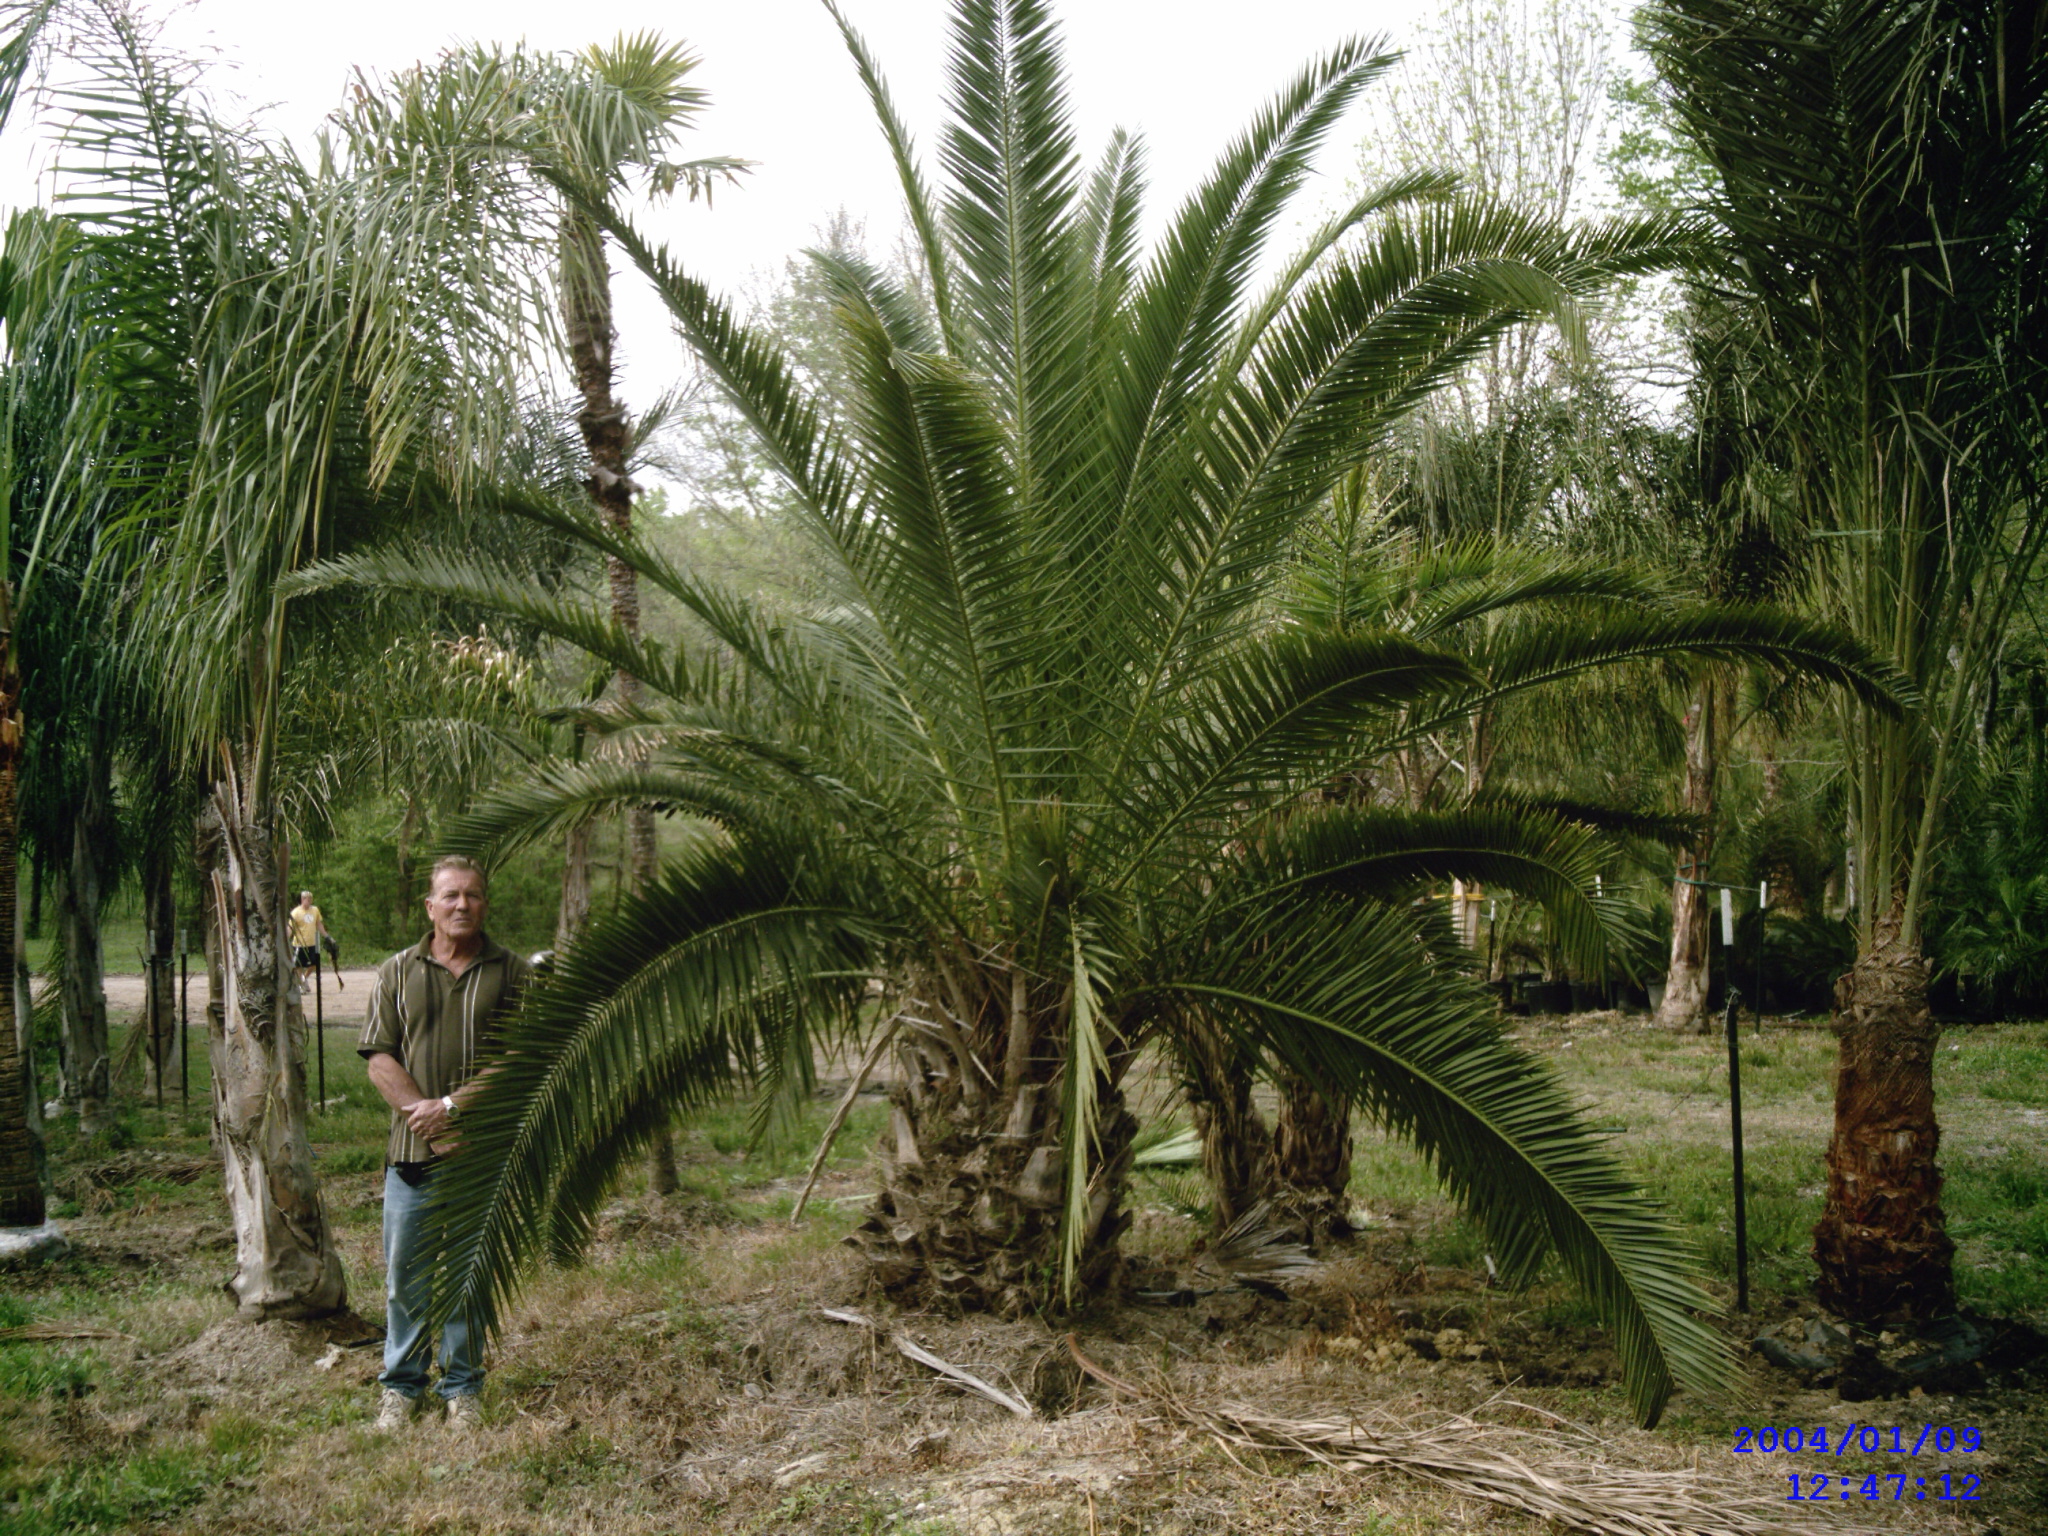 Palm Trees Of Houston Prices, Palm Tree prices, palm tree specials,